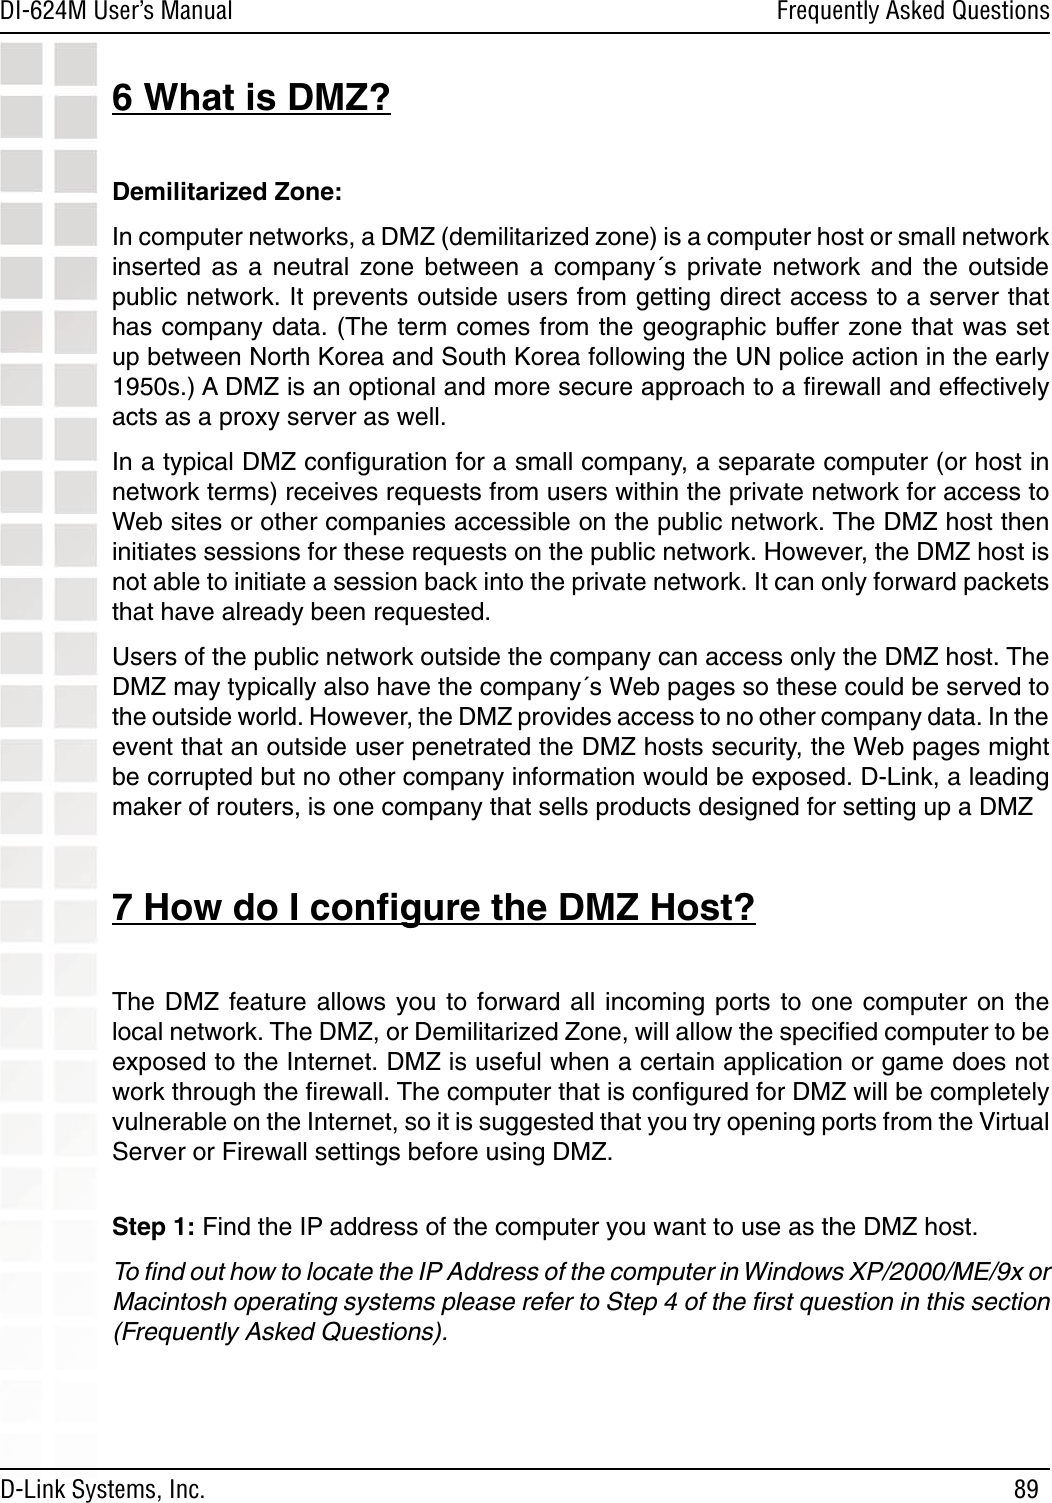 89DI-624M User’s Manual D-Link Systems, Inc.Frequently Asked Questions6 What is DMZ?Demilitarized Zone:In computer networks, a DMZ (demilitarized zone) is a computer host or small network inserted  as  a  neutral  zone  between  a  company´s  private  network  and  the  outside public network. It prevents outside users from getting direct access to a server that has company data. (The term comes from the geographic buffer zone that was set up between North Korea and South Korea following the UN police action in the early 1950s.) A DMZ is an optional and more secure approach to a ﬁrewall and effectively acts as a proxy server as well.In a typical DMZ conﬁguration for a small company, a separate computer (or host in network terms) receives requests from users within the private network for access to Web sites or other companies accessible on the public network. The DMZ host then initiates sessions for these requests on the public network. However, the DMZ host is not able to initiate a session back into the private network. It can only forward packets that have already been requested.Users of the public network outside the company can access only the DMZ host. The DMZ may typically also have the company´s Web pages so these could be served to the outside world. However, the DMZ provides access to no other company data. In the event that an outside user penetrated the DMZ hosts security, the Web pages might be corrupted but no other company information would be exposed. D-Link, a leading maker of routers, is one company that sells products designed for setting up a DMZ7 How do I conﬁgure the DMZ Host?The DMZ feature allows  you  to forward all incoming  ports  to one computer on  the local network. The DMZ, or Demilitarized Zone, will allow the speciﬁed computer to be exposed to the Internet. DMZ is useful when a certain application or game does not work through the ﬁrewall. The computer that is conﬁgured for DMZ will be completely vulnerable on the Internet, so it is suggested that you try opening ports from the Virtual Server or Firewall settings before using DMZ.  Step 1: Find the IP address of the computer you want to use as the DMZ host.To ﬁnd out how to locate the IP Address of the computer in Windows XP/2000/ME/9x or Macintosh operating systems please refer to Step 4 of the ﬁrst question in this section (Frequently Asked Questions). 